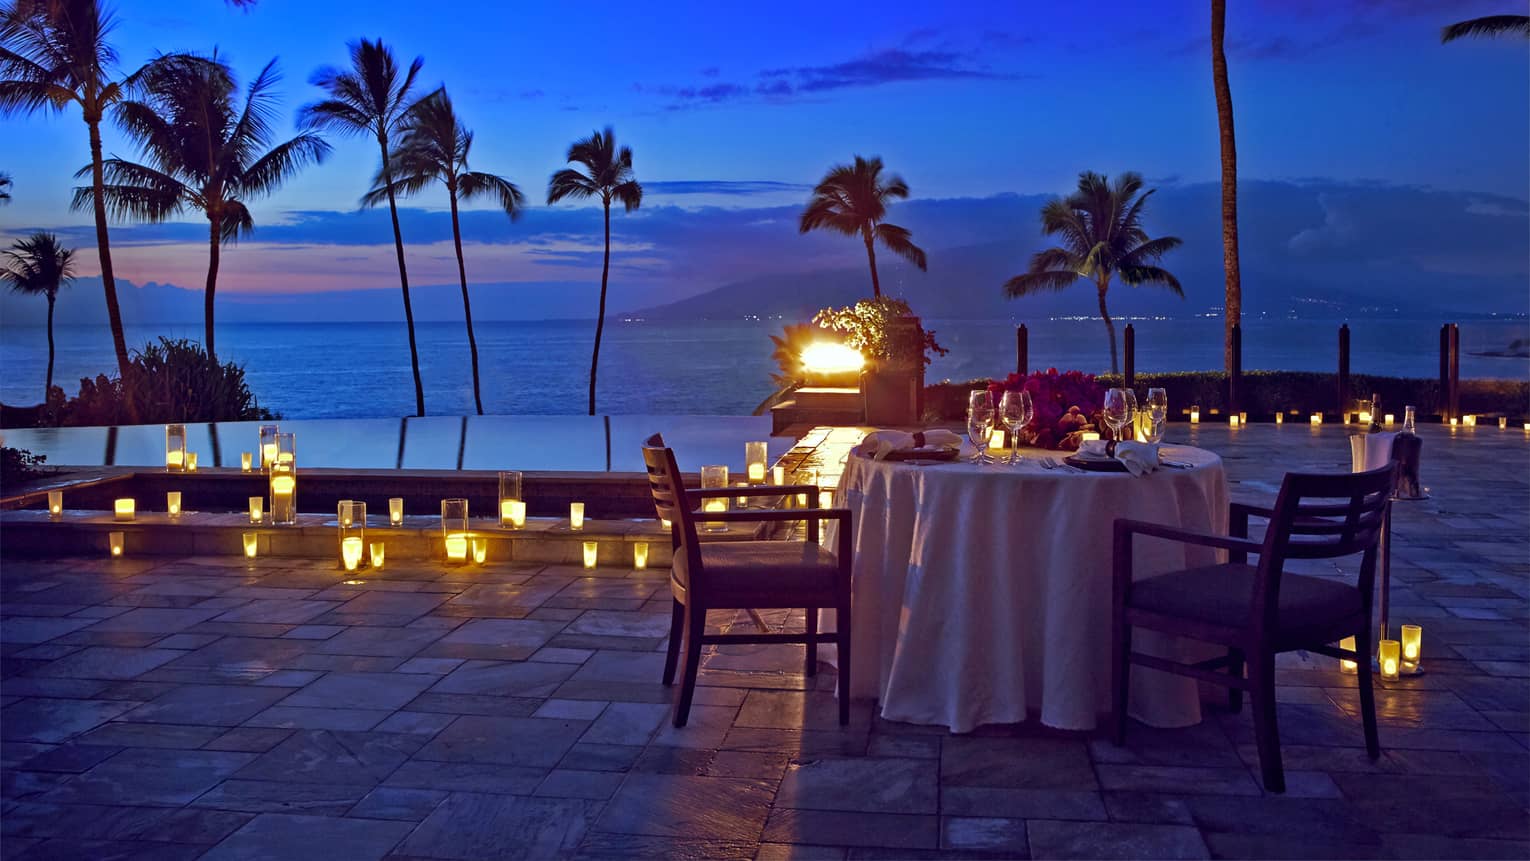 An outdoor candlelit dinner by the seaside in Maui